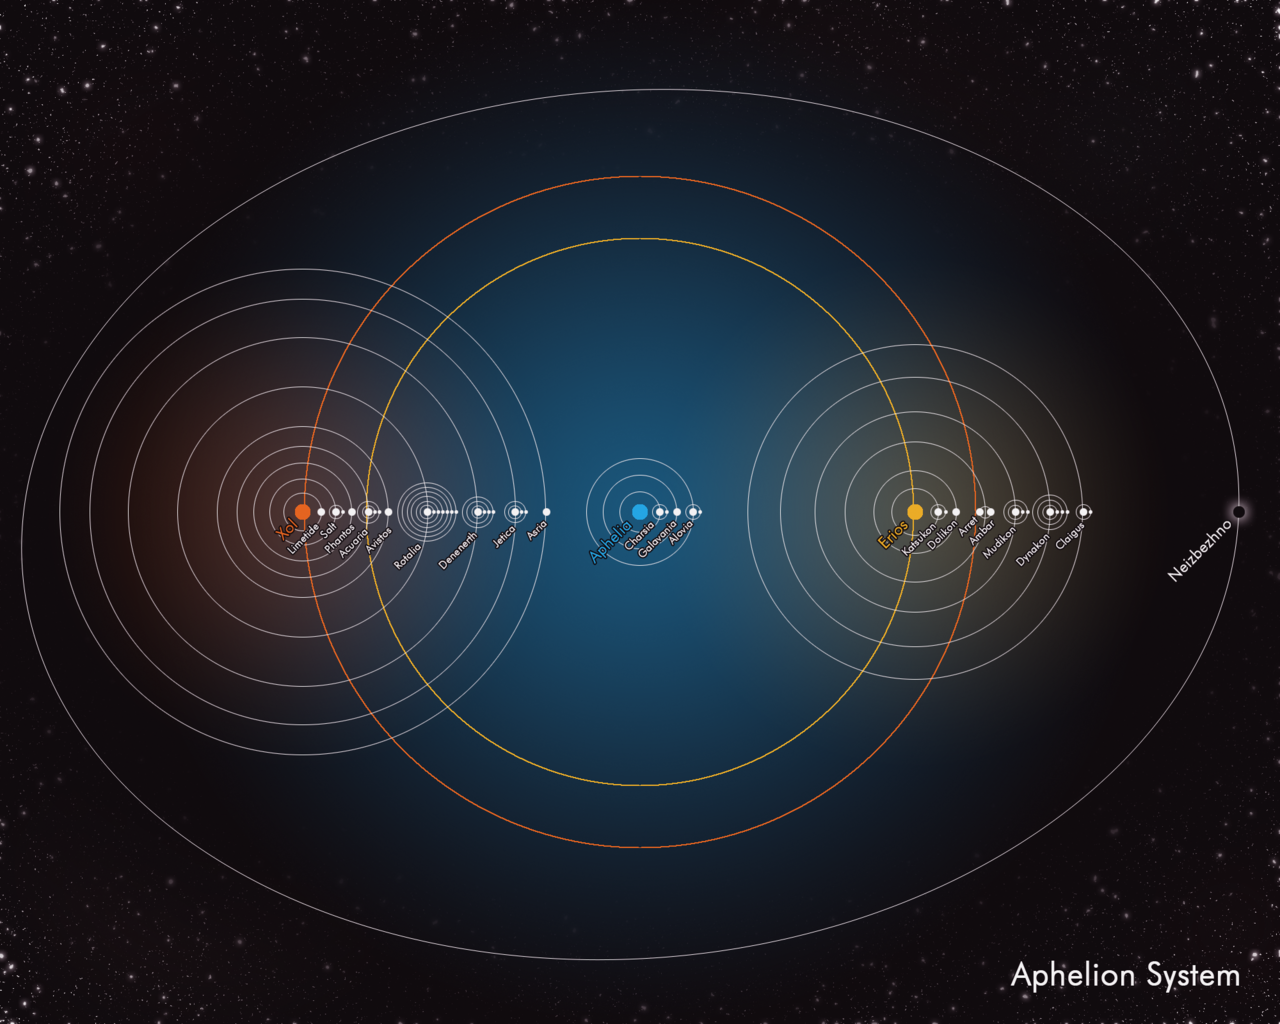 The Aphelion System is diverse and complex star system fraught with danger and wonder.